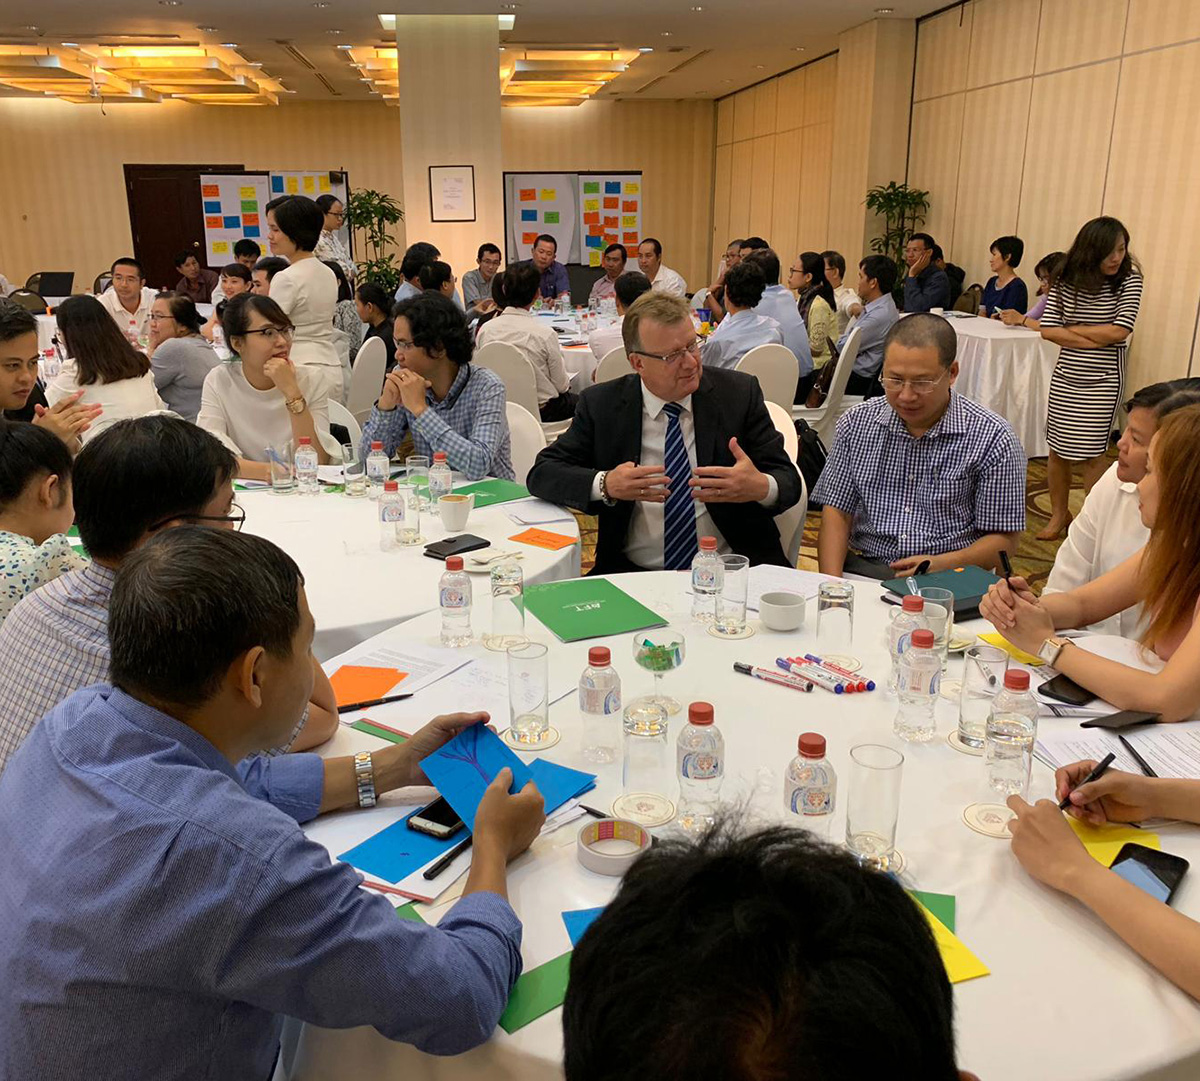 Aus4Innovation has organised experience sharing events between Australian experts and Vietnamese research institutes and businesses. In this workshop, a member of CSIRO’s SME Connect team helped researchers understand the value of business partnerships.